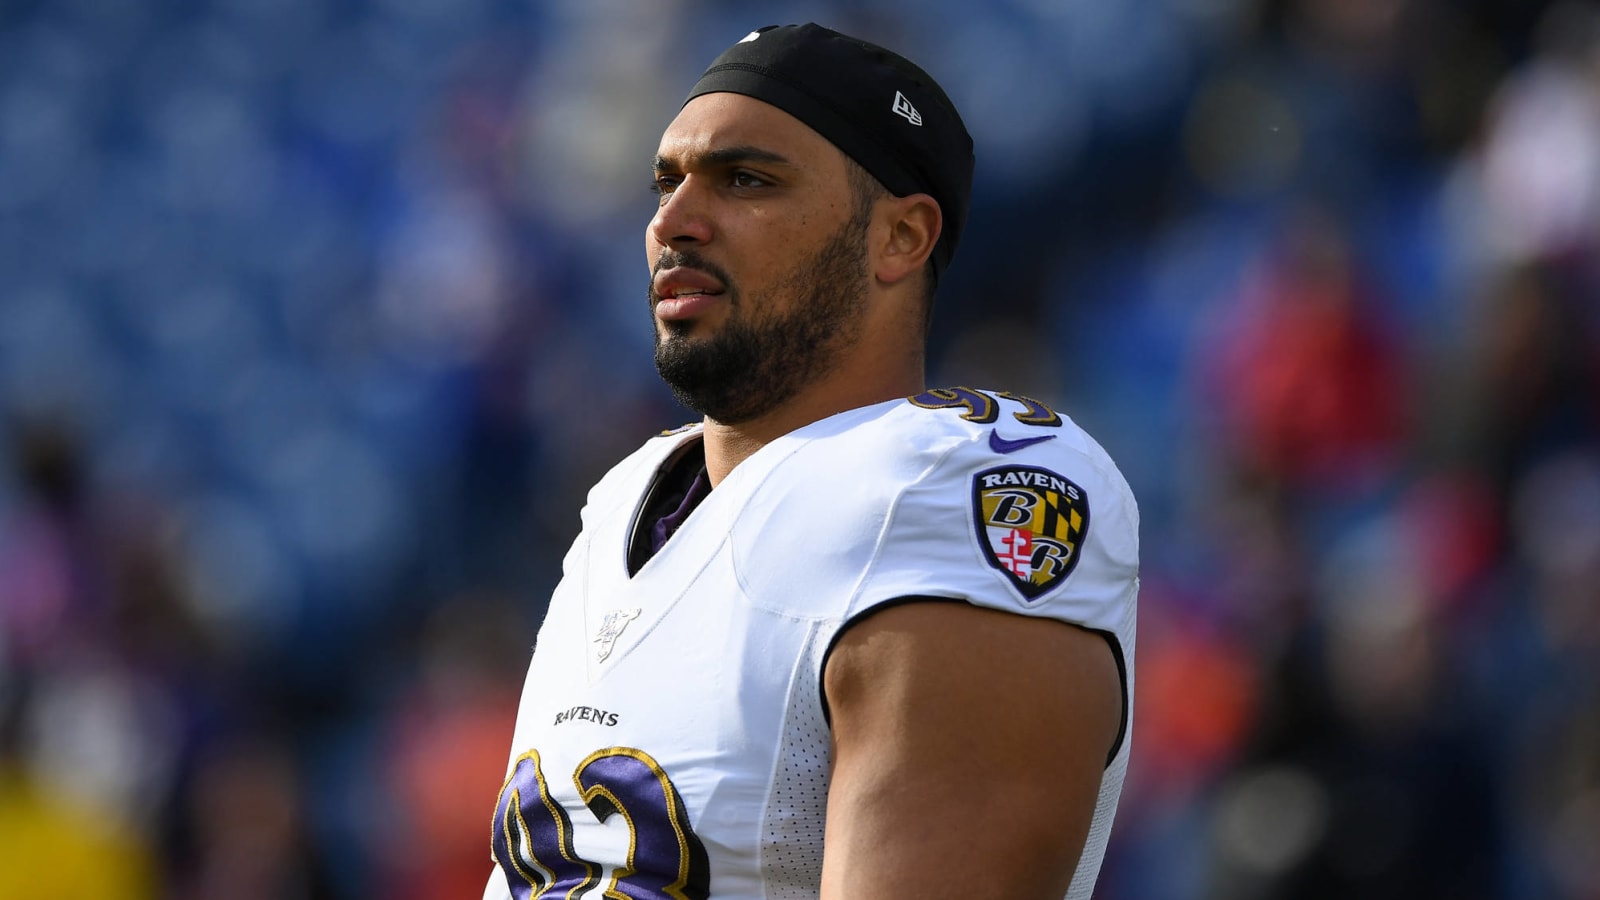 In rare intra-division trade, Ravens sending DL Chris Wormley to Steelers